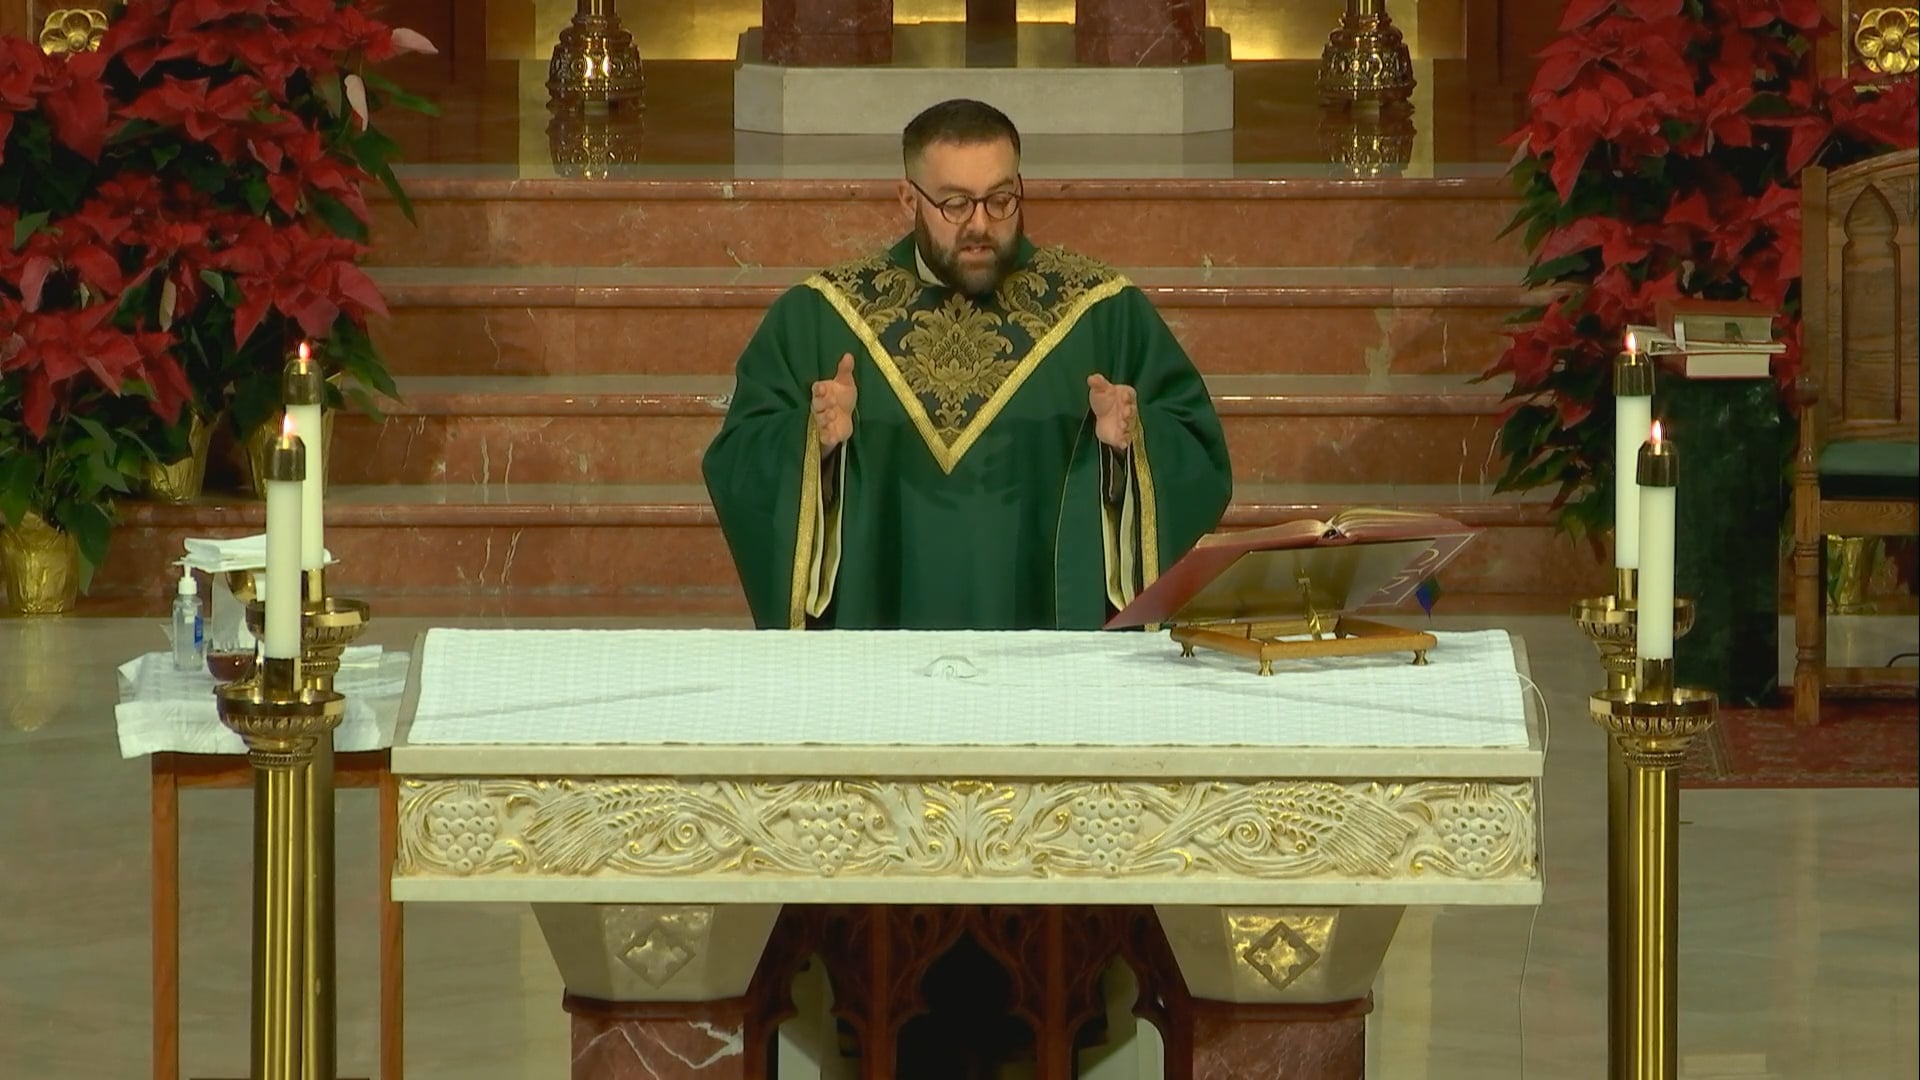 Mass from St. Agnes Cathedral - January 17, 2023